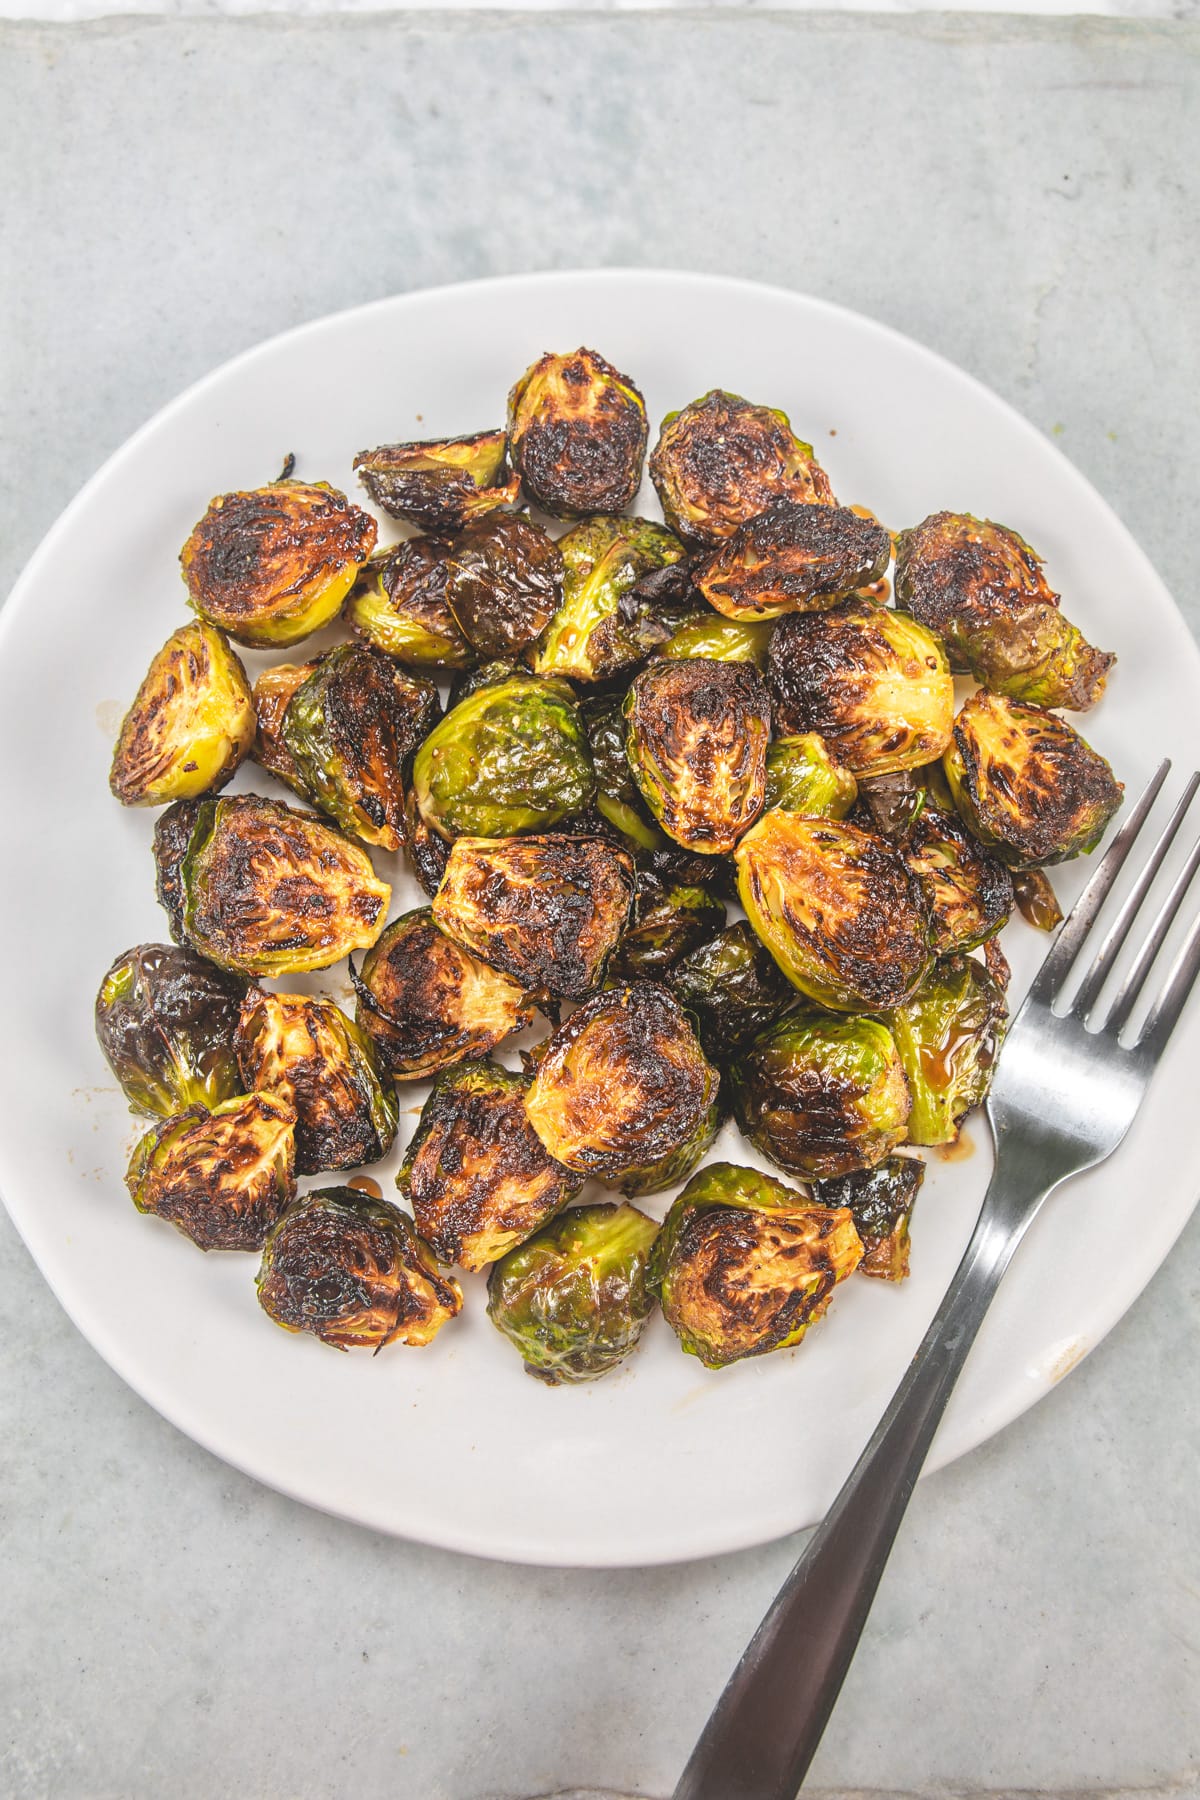 Roasted Brussels Sprouts with balsamic vinegar served in a white plate with fork.